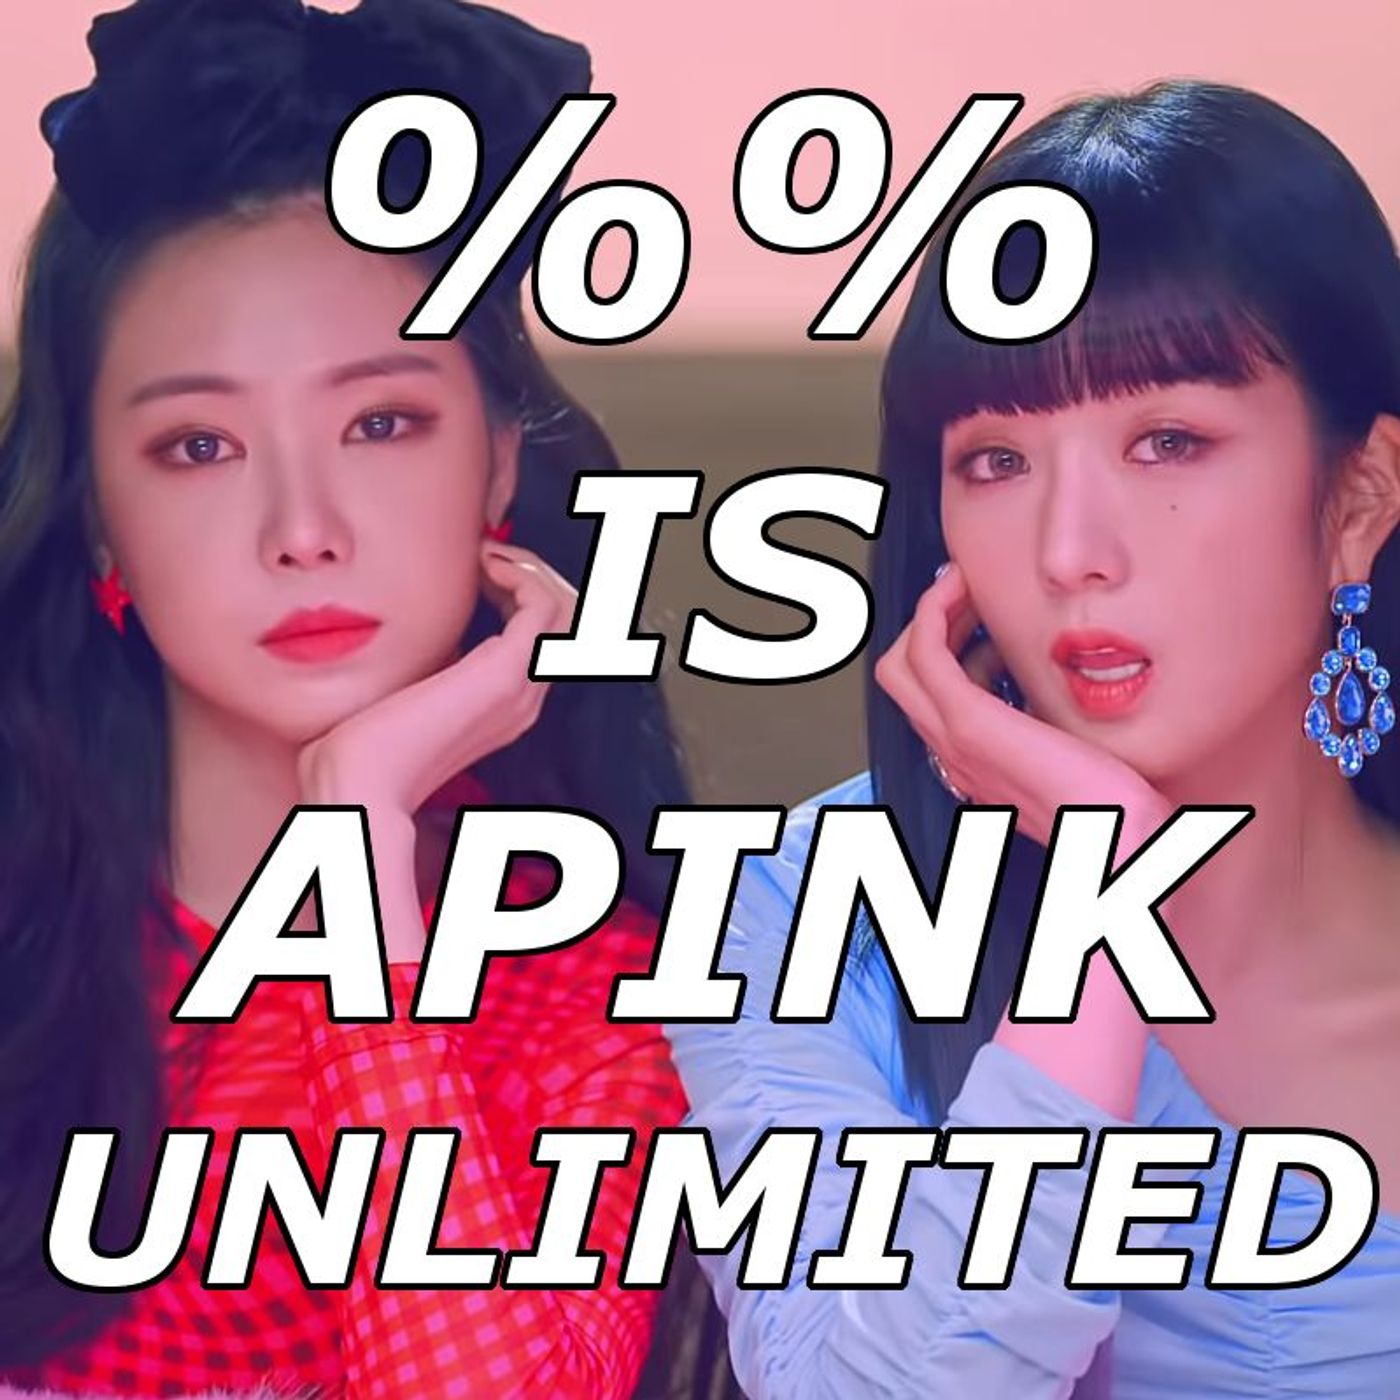 ”%%”(Eung Eung(응응)) Is Apink Unlimited